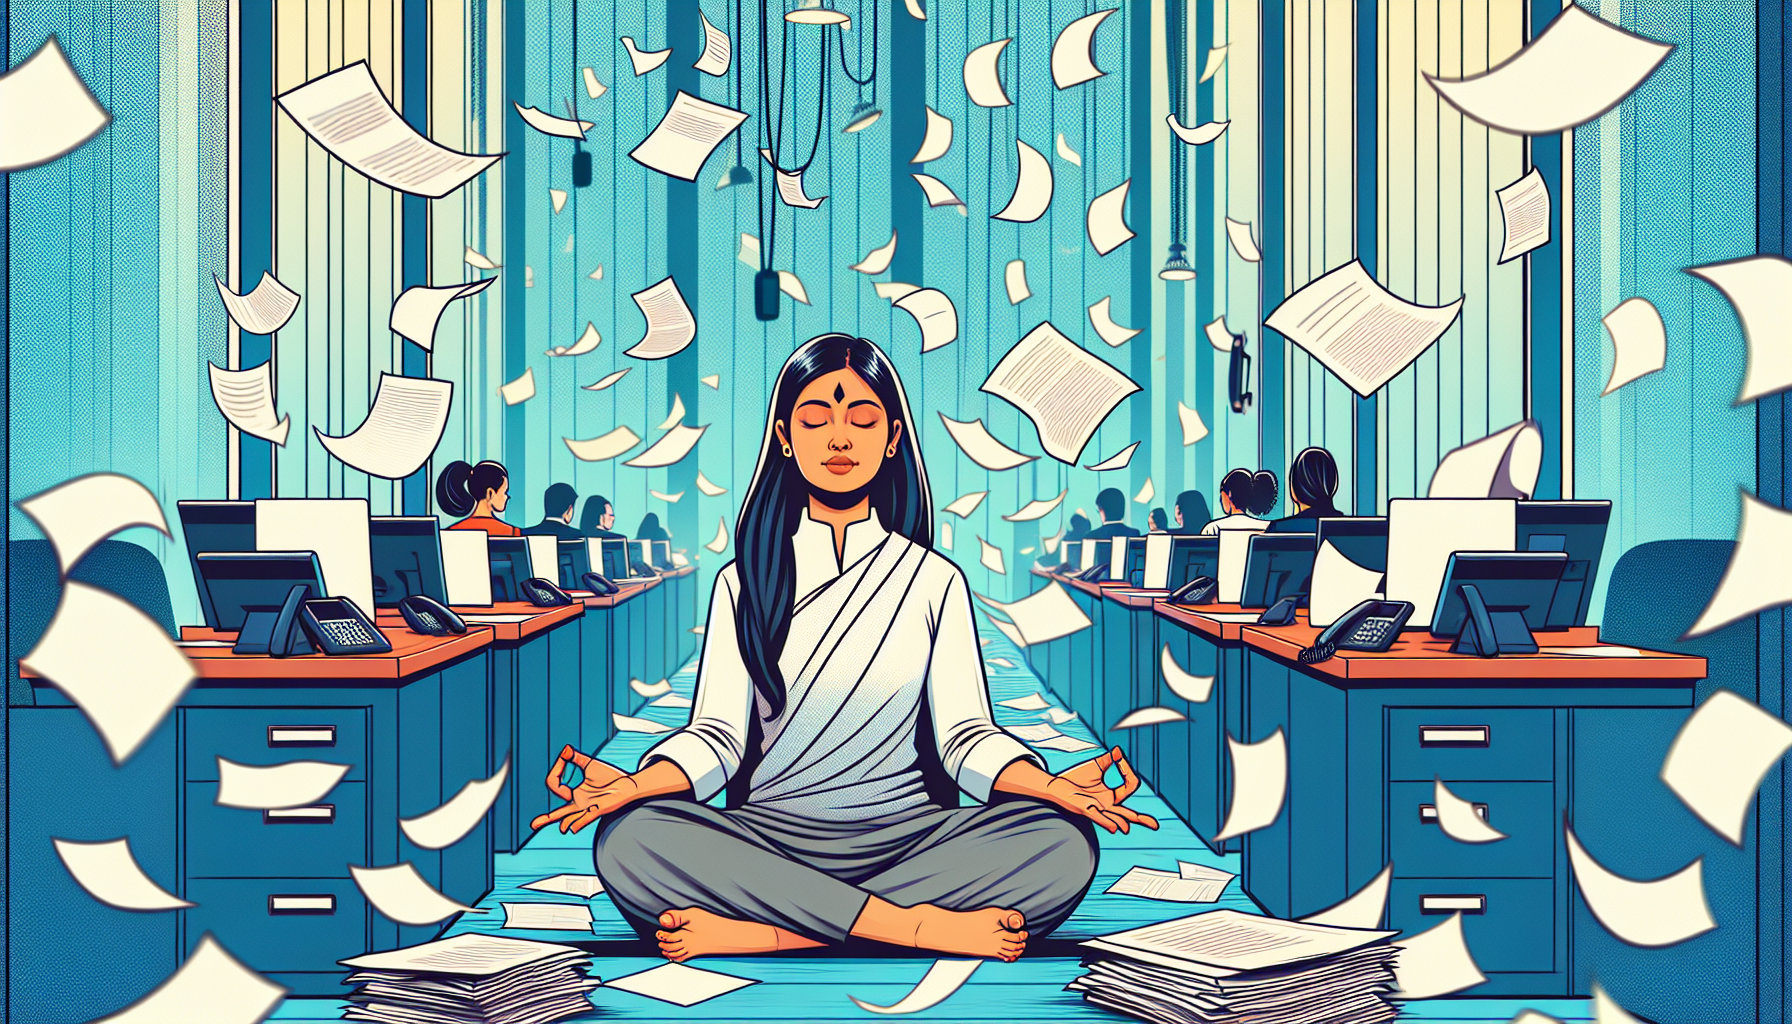 A person meditating peacefully amidst a chaotic office environment with papers flying around and phones ringing.